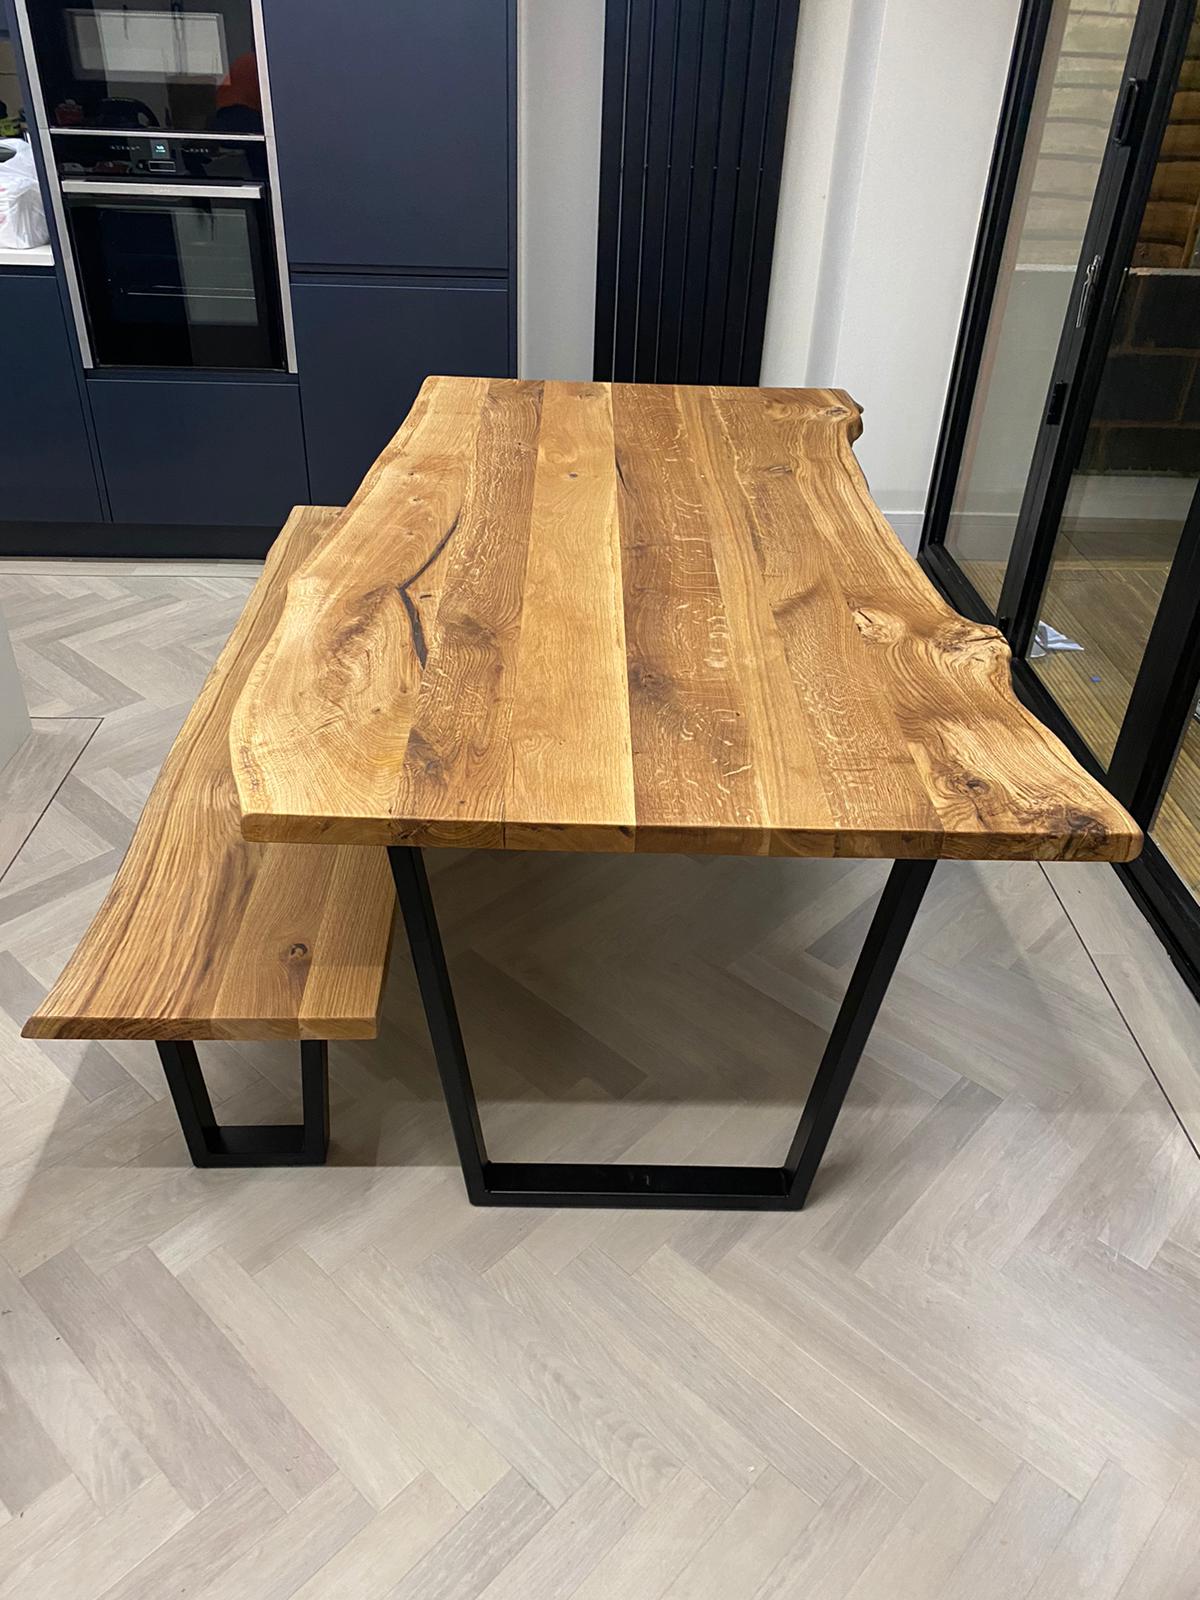 Rustic Solid Oak Table 24m Rustic Modern Furniture Rustic Tables For Life